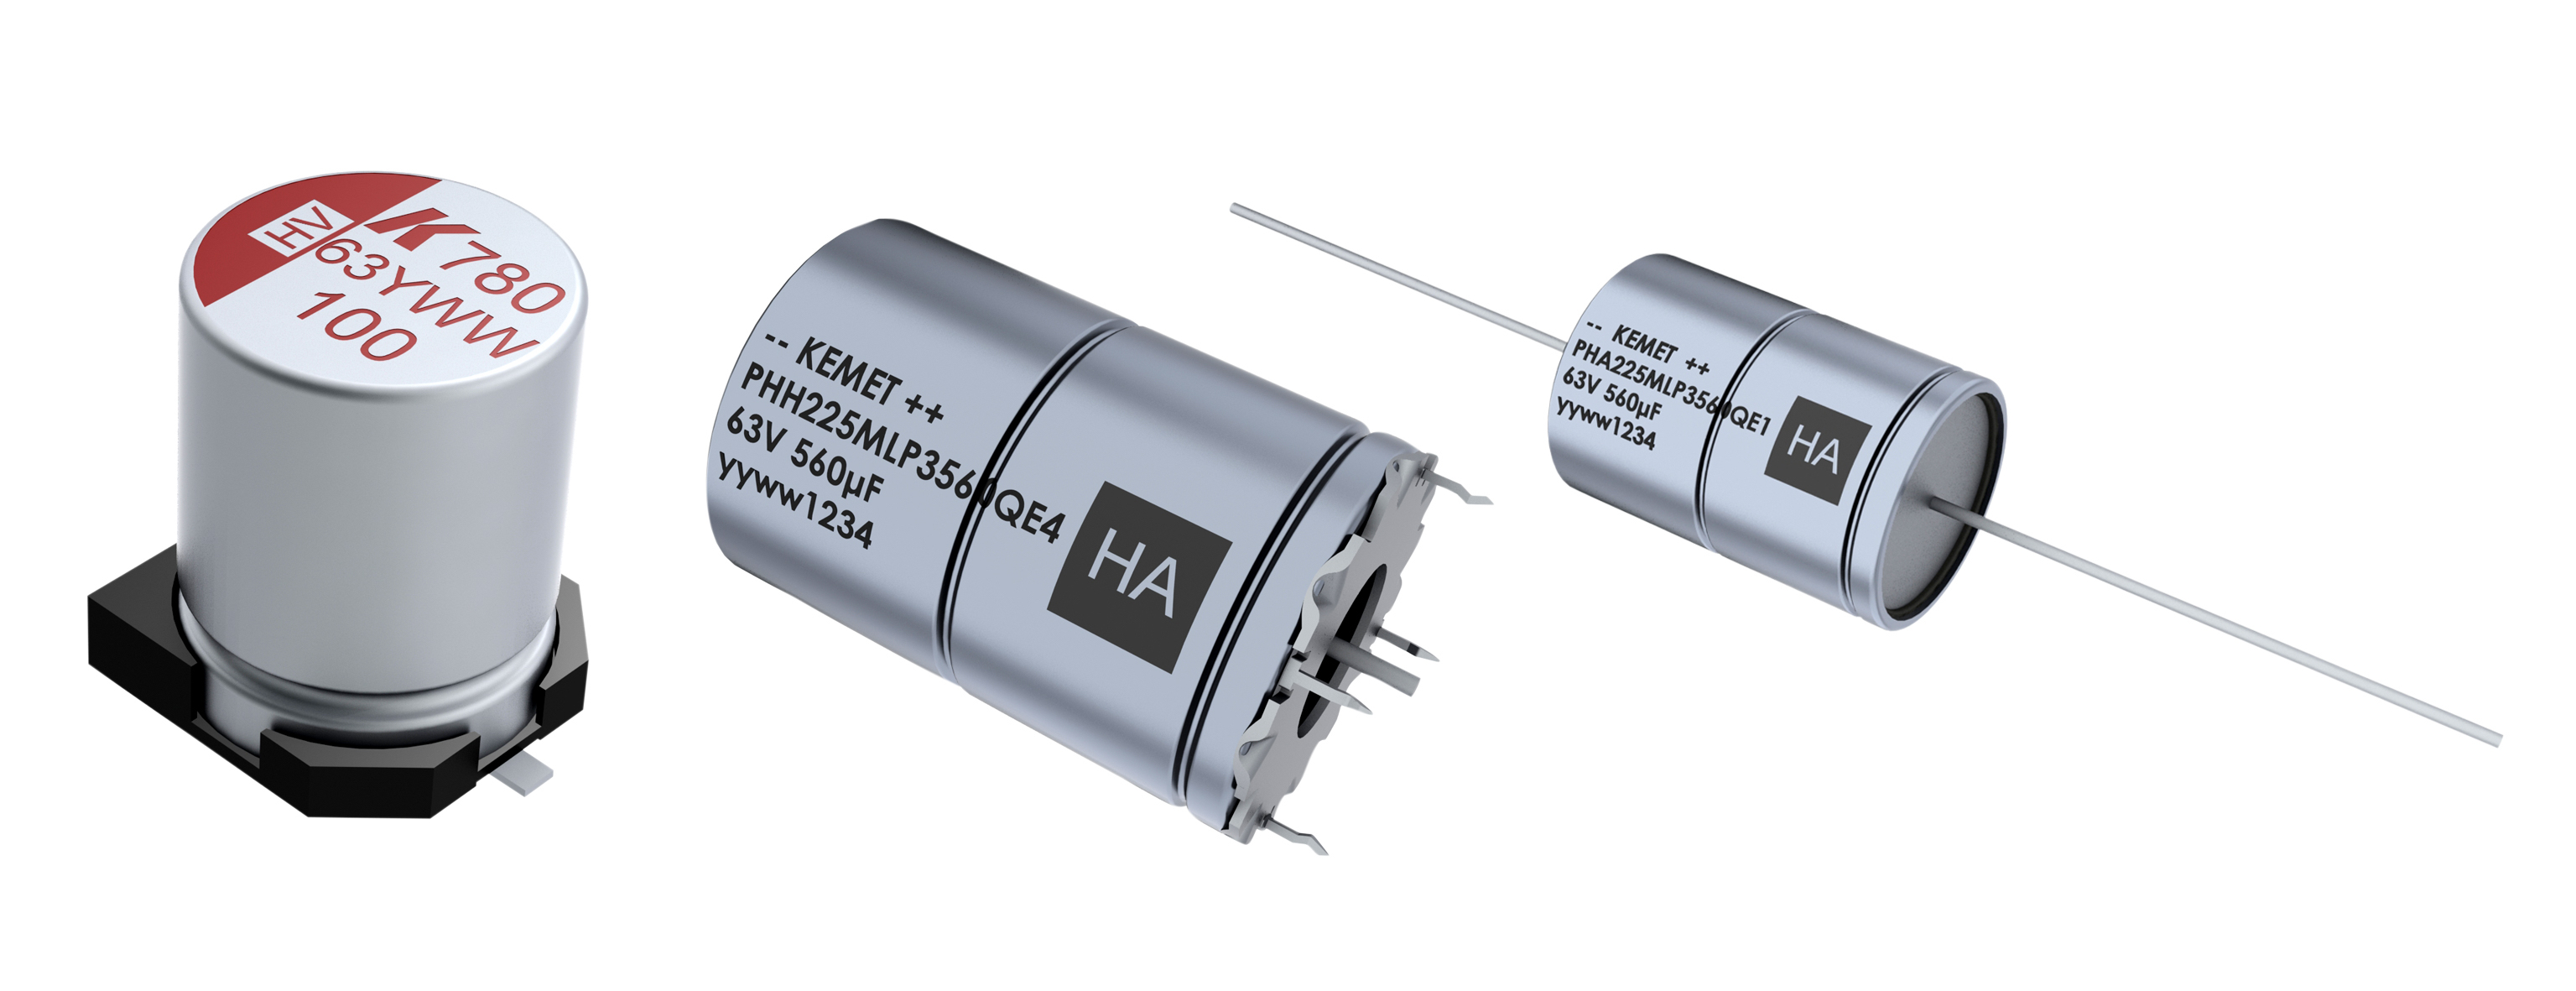 Hybrid Aluminum Polymer Capacitors for Auto Applications